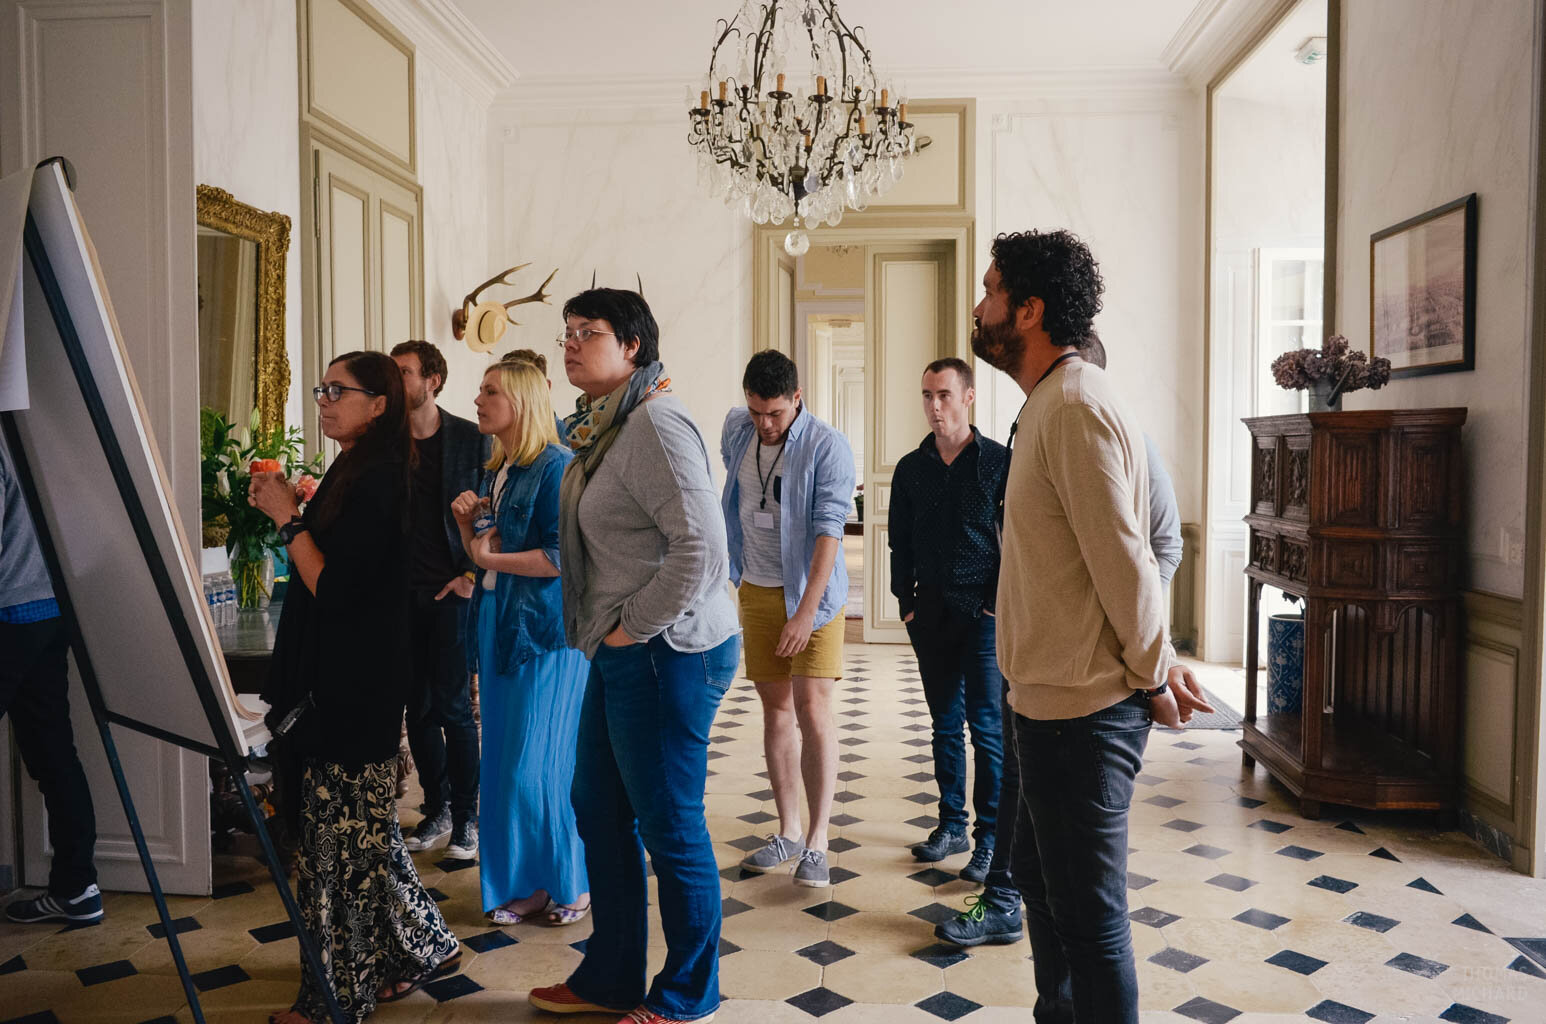 A group of people standing in room under a chandelier during a workshop or a retreat in France.